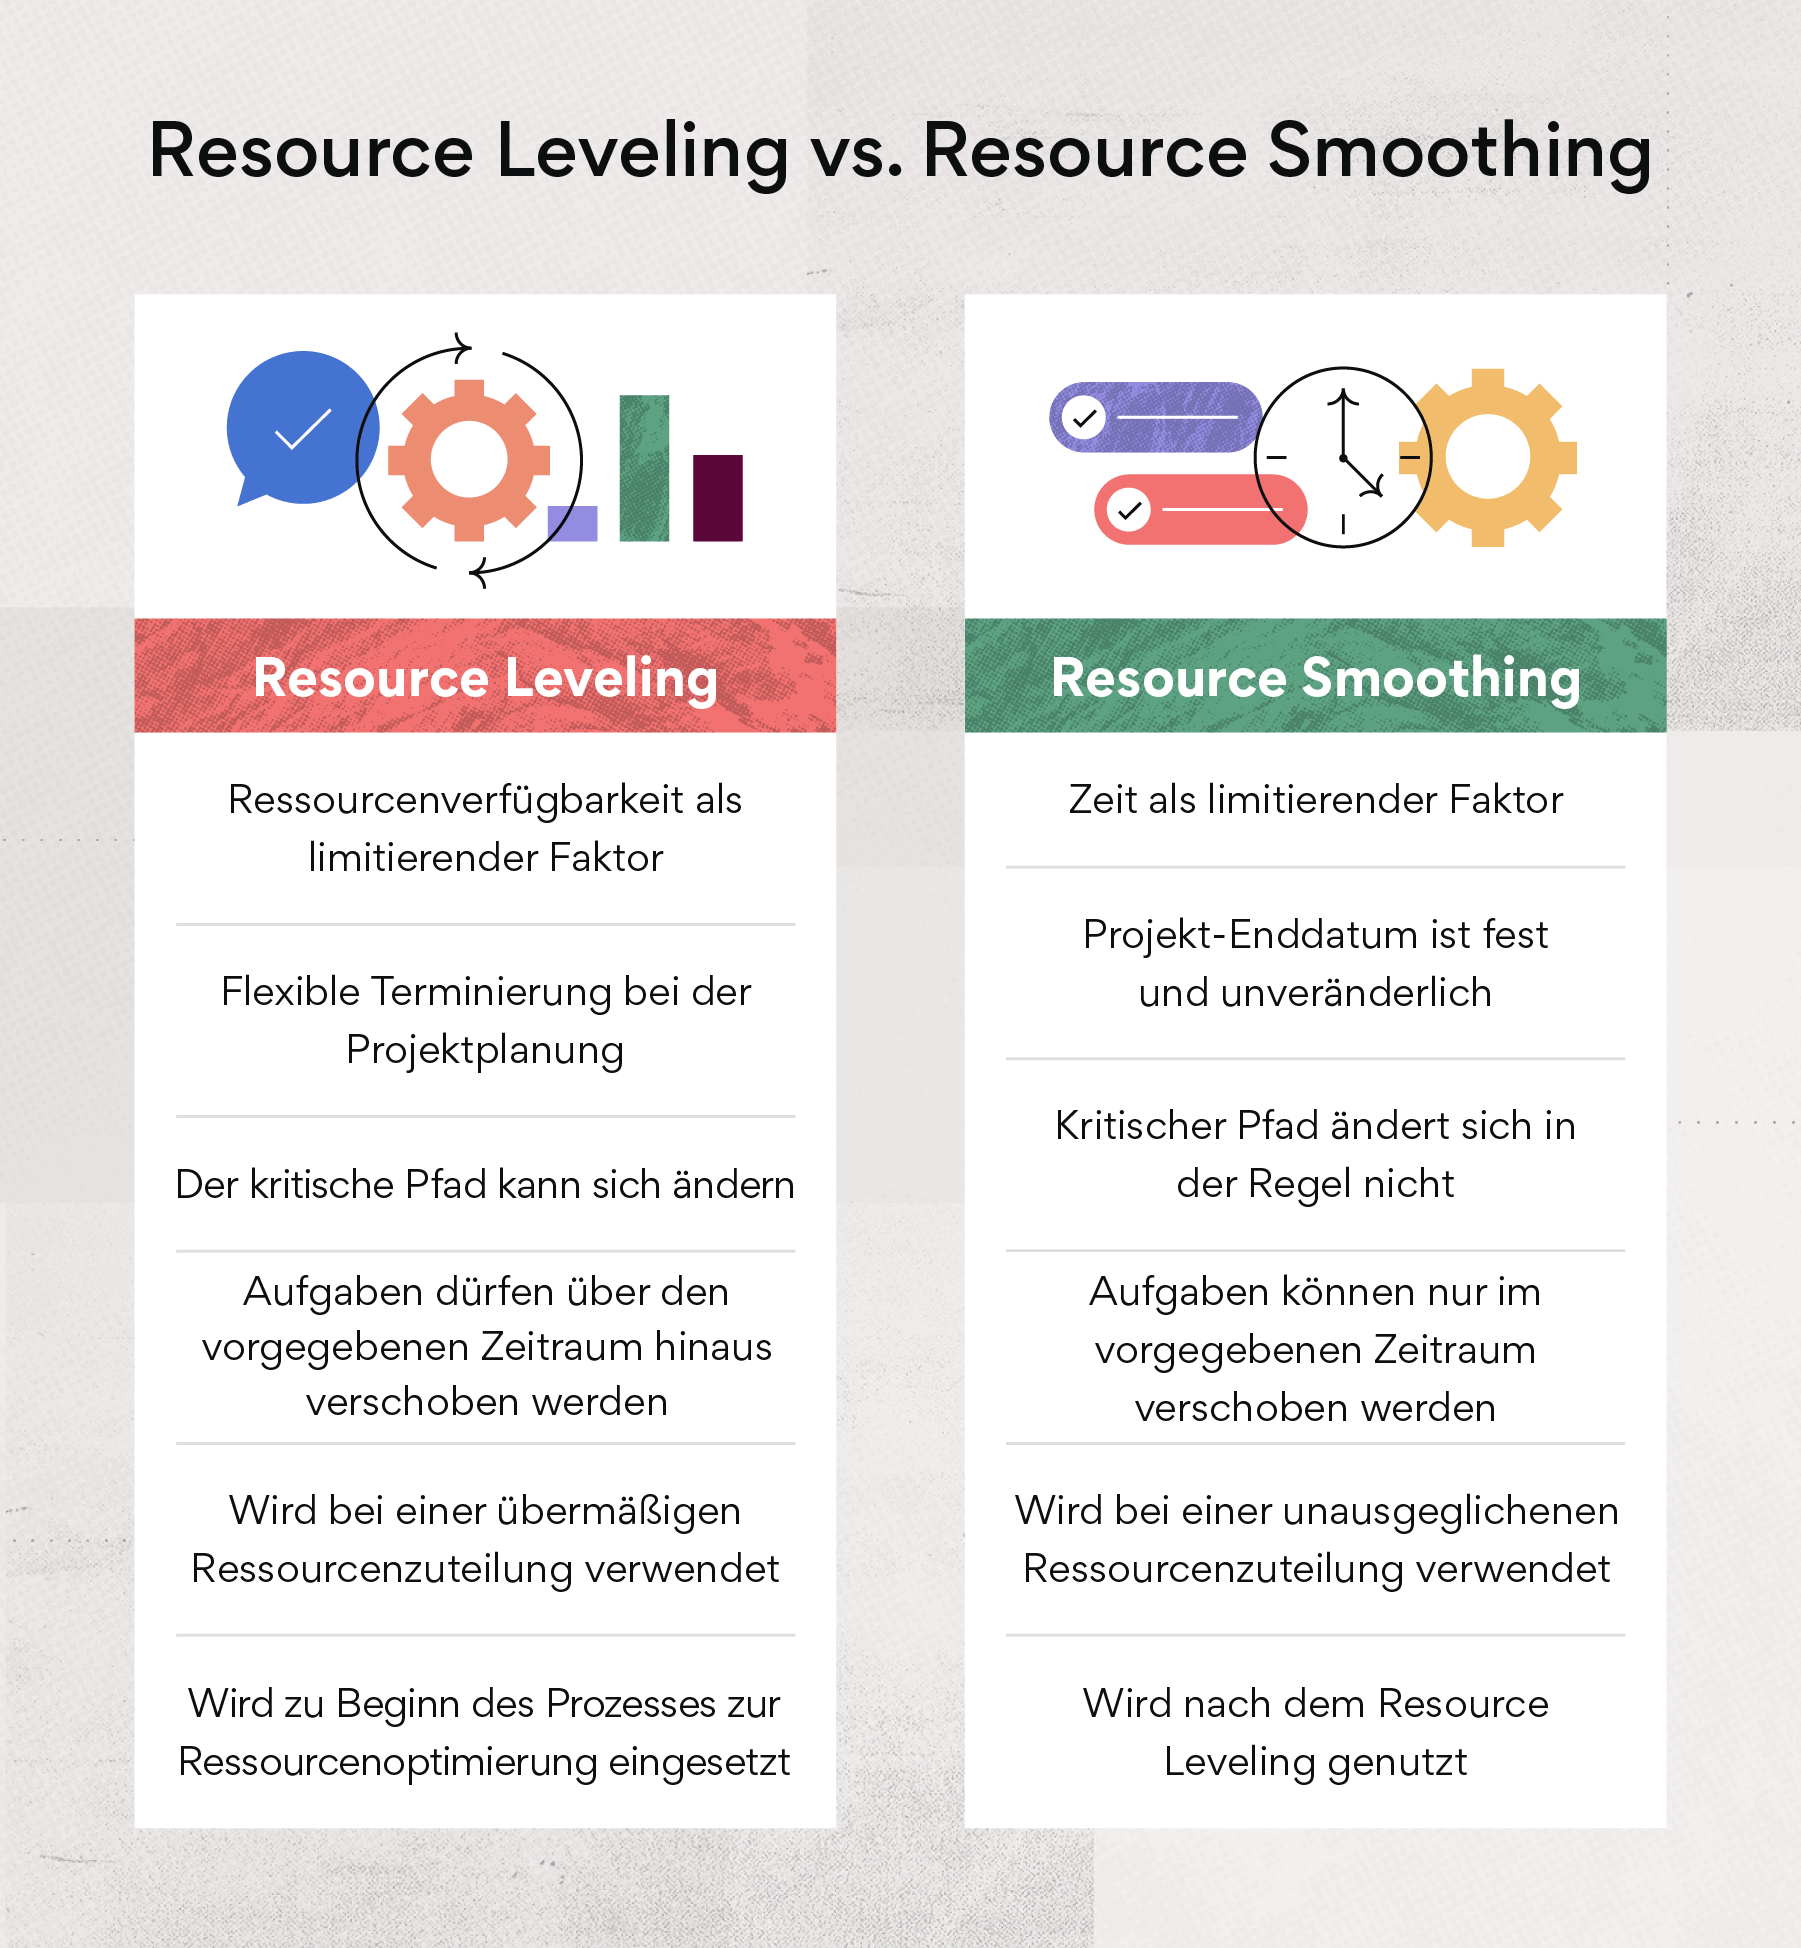 Resource Leveling vs. Resource Smoothing